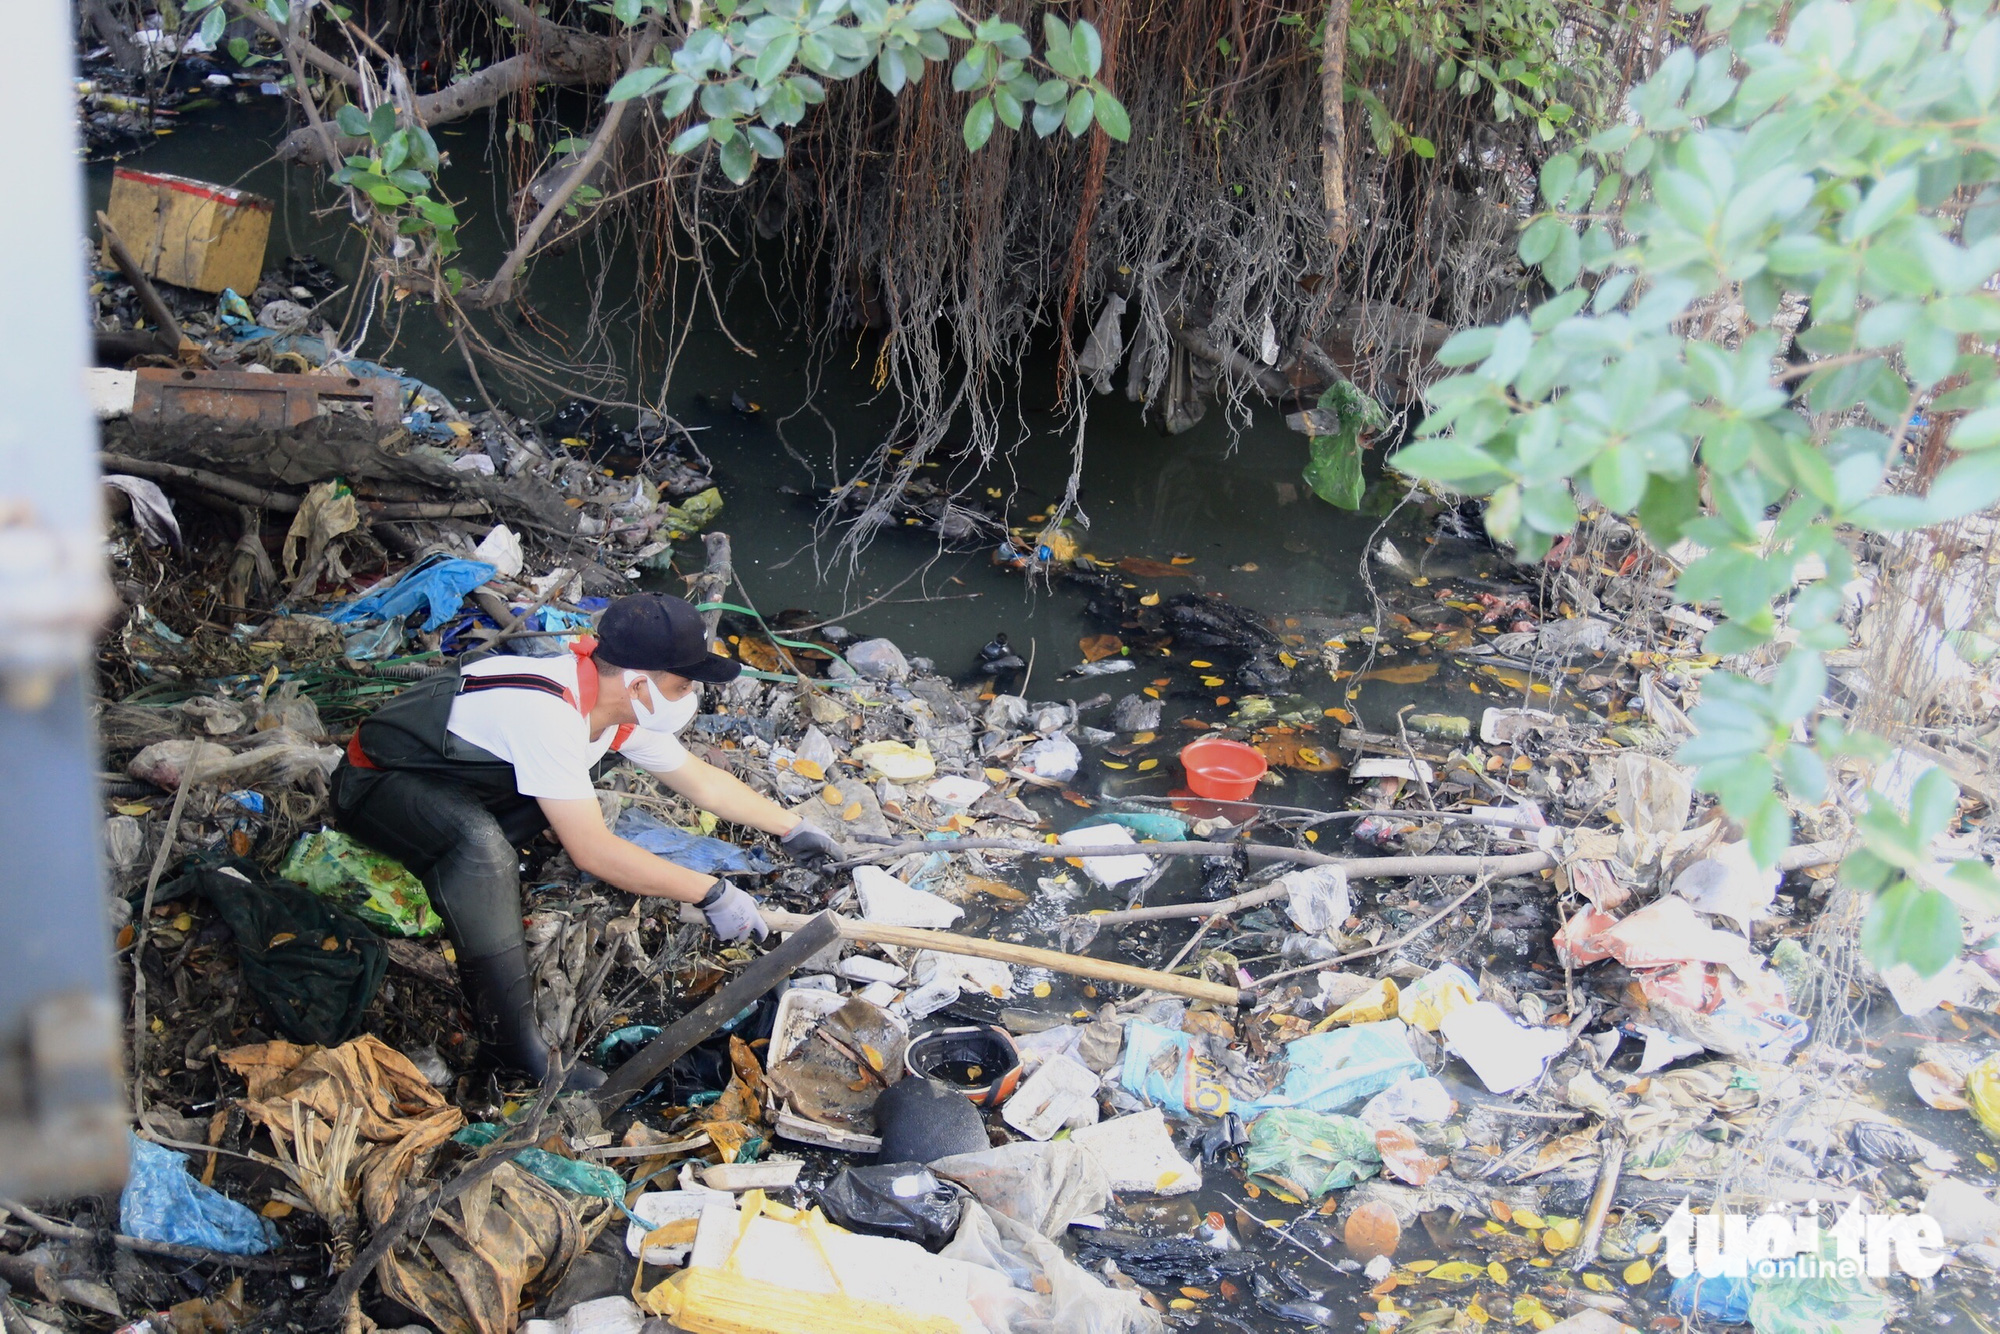 Phan Nhan, a 23-year-old man from the Central Highlands of Dak Lak, said while raking garbage bags out of a canal that ‘members earlier worn wellington boots and glovers only. We now equip more personal protective equipment to avoid broken glass pieces and injection needles’.